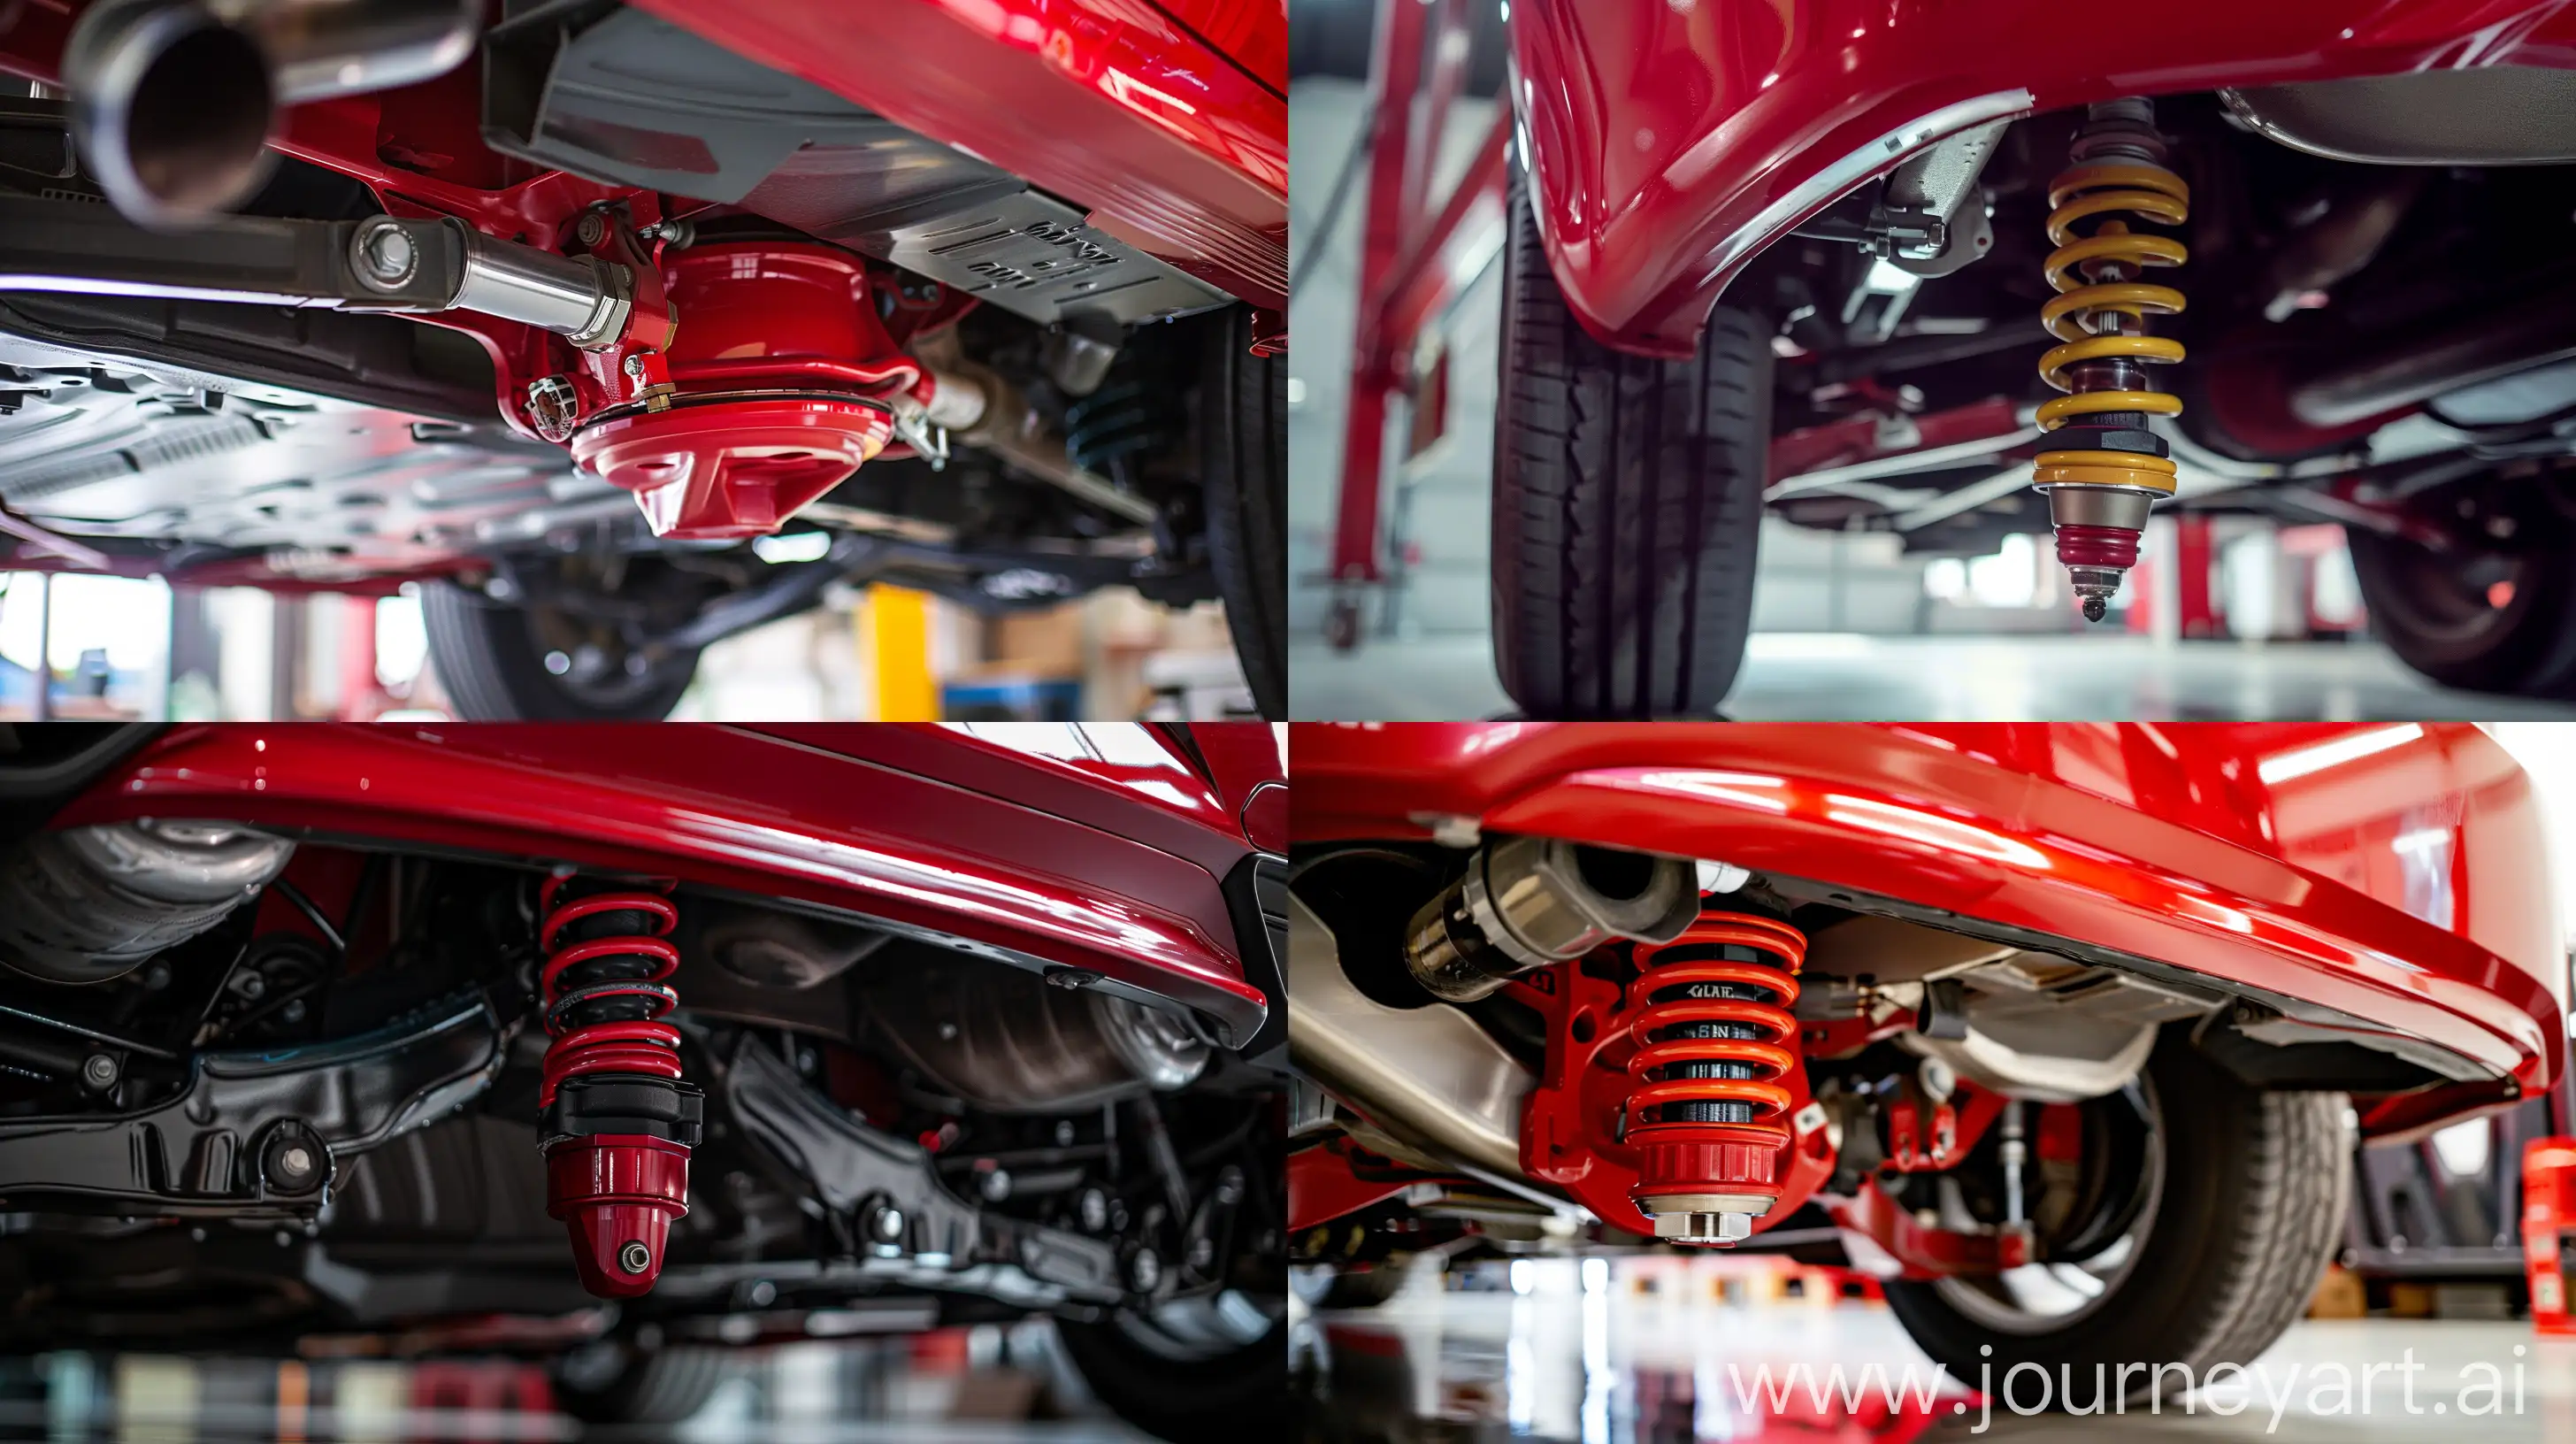 The red car's shock absorber is located underneath the vehicle. --ar 16:9 --style raw